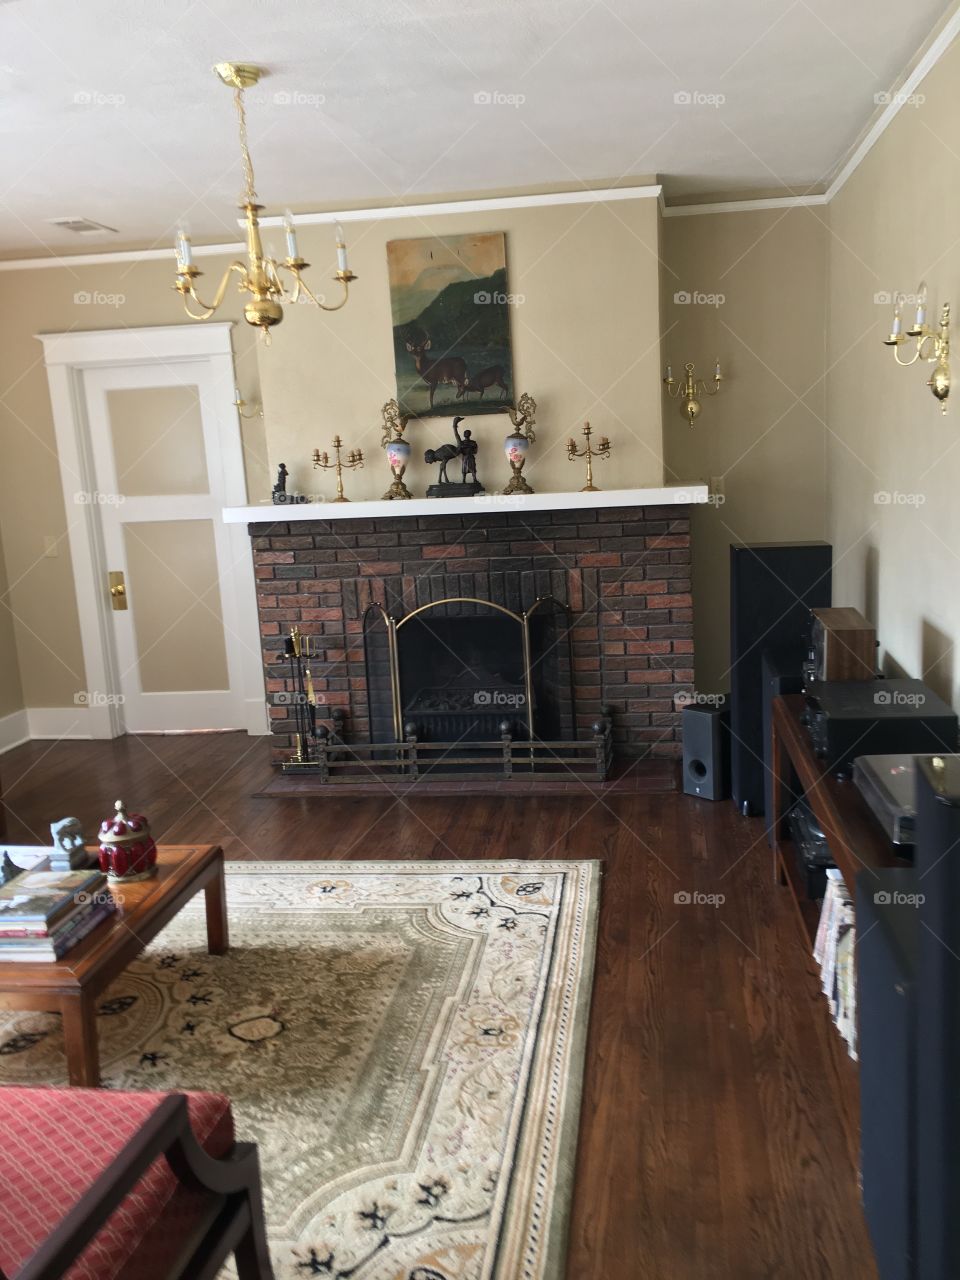 Second floor fire place remodel